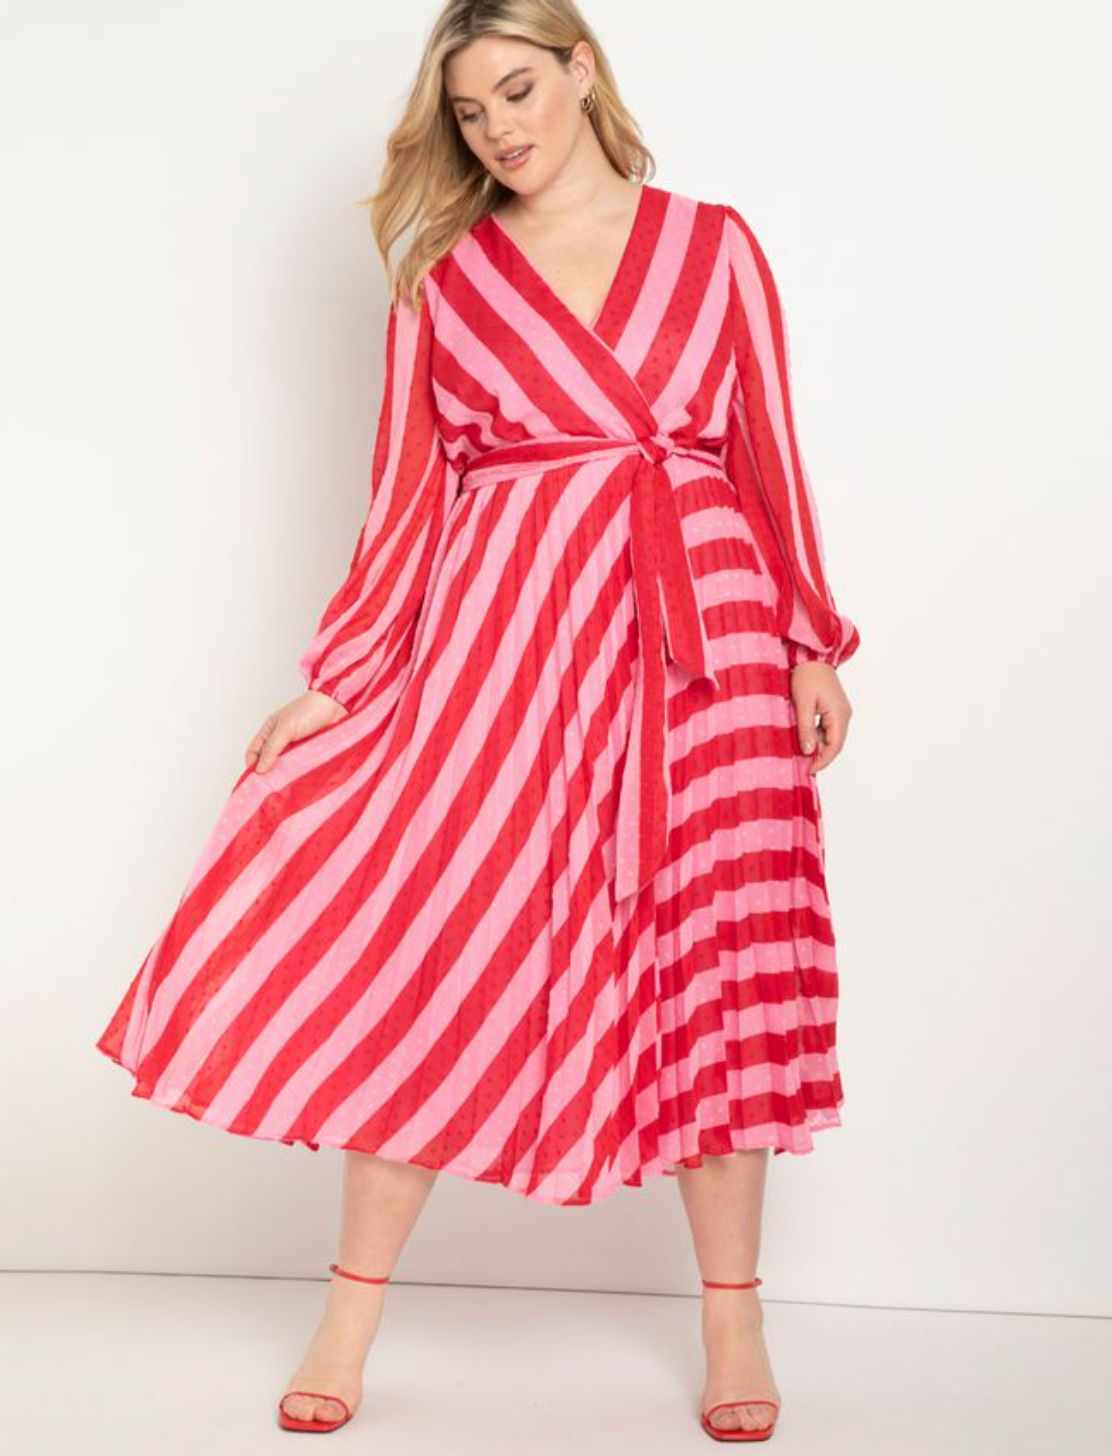 Model wearing midi-length long sleeve hot pink and light pink striped dress with tie waist and pleated skirt